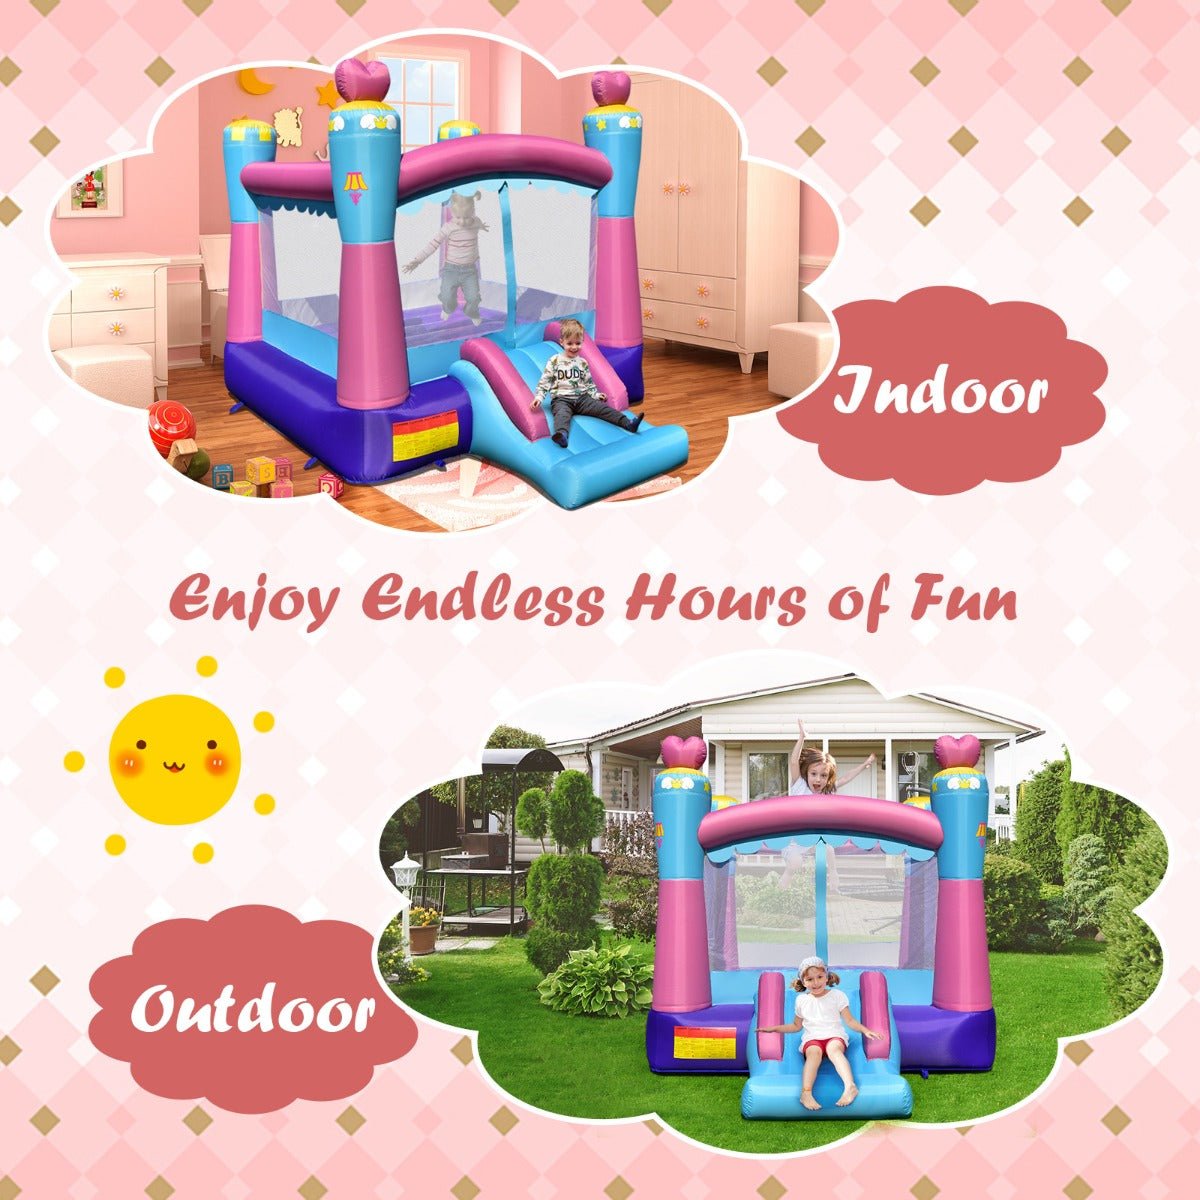 Enchanted Princess Inflatable Bouncer - Exciting Jumping Adventure